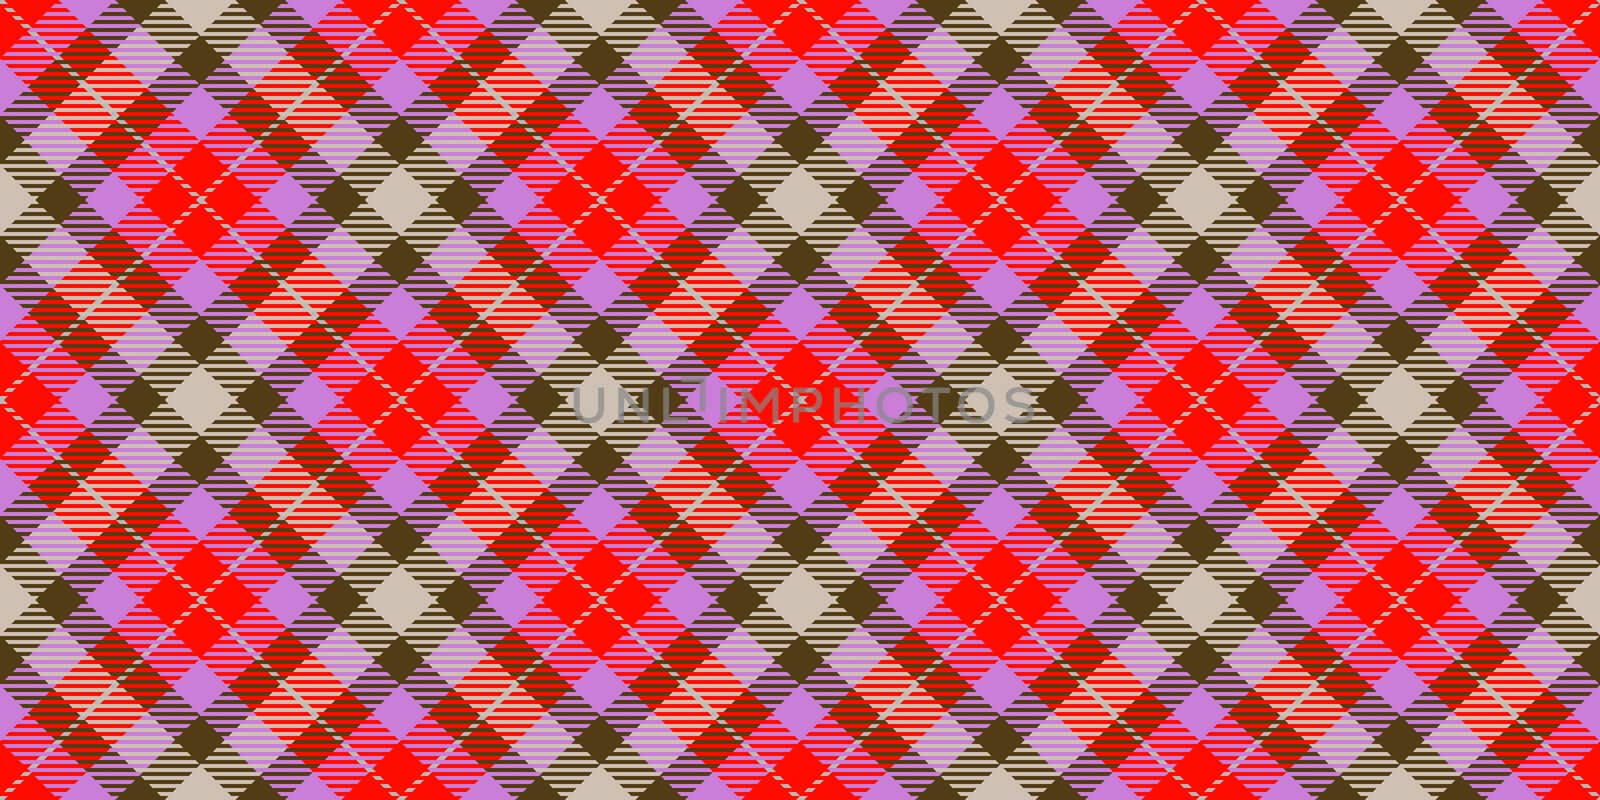 Red Seamless Checkered Rhombuses Pattern. Plaid Rug Background. Tartan Texture. by sanches812